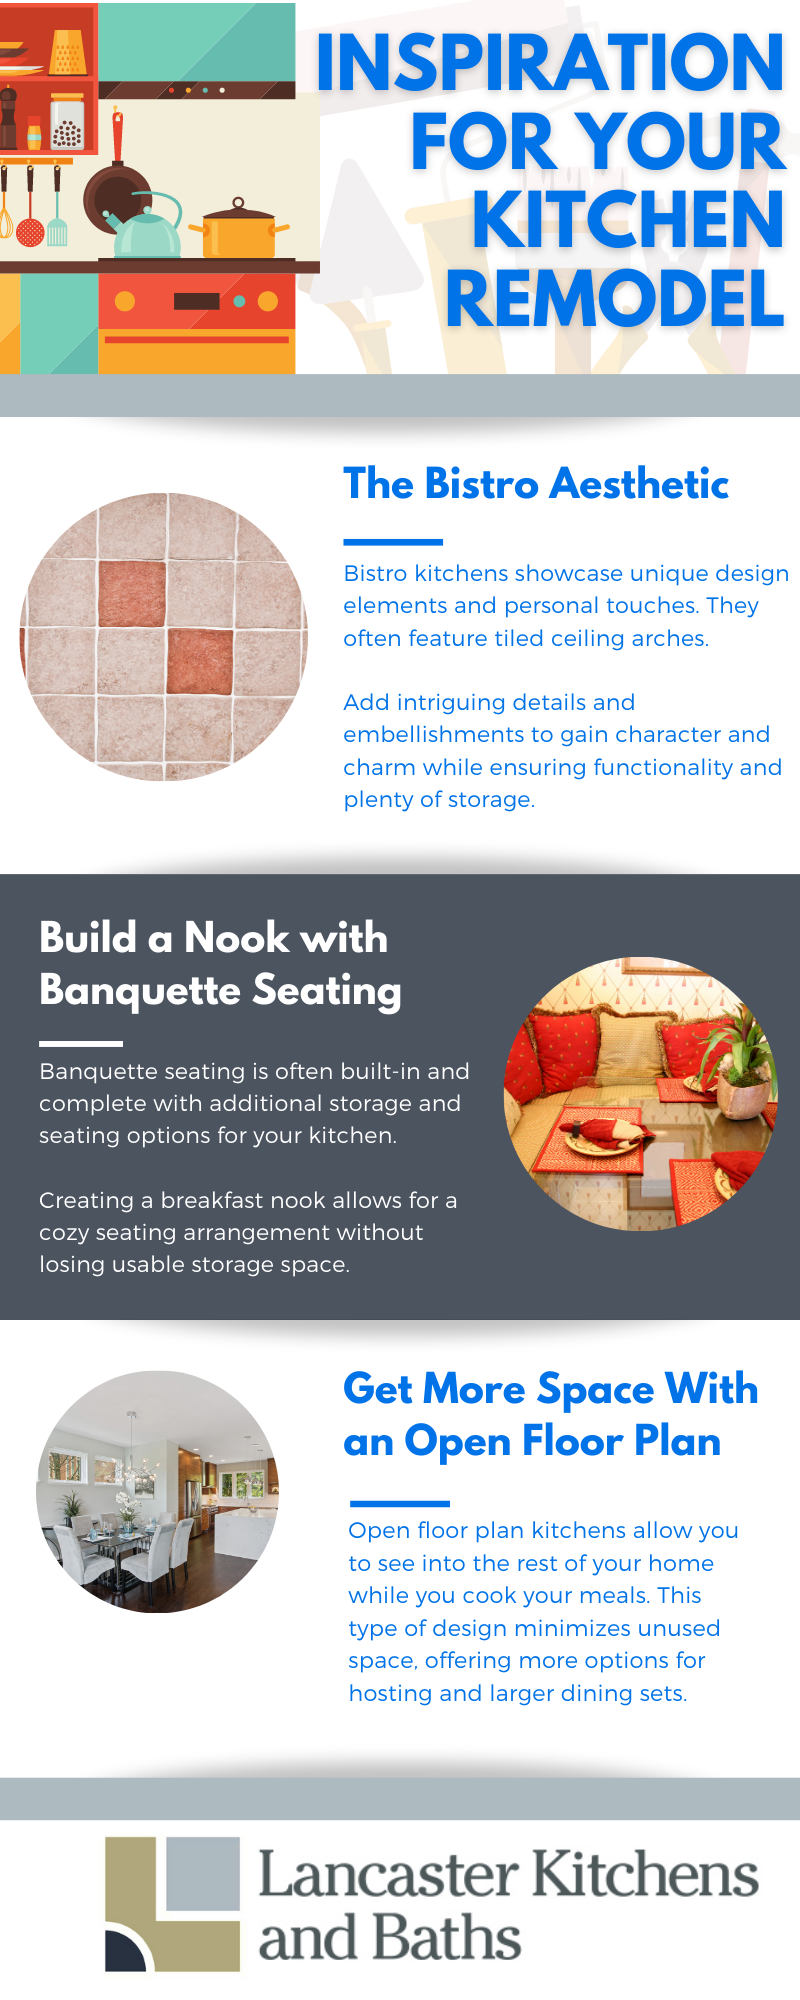 Infographic showing three different design ideas for a kitchen renovation